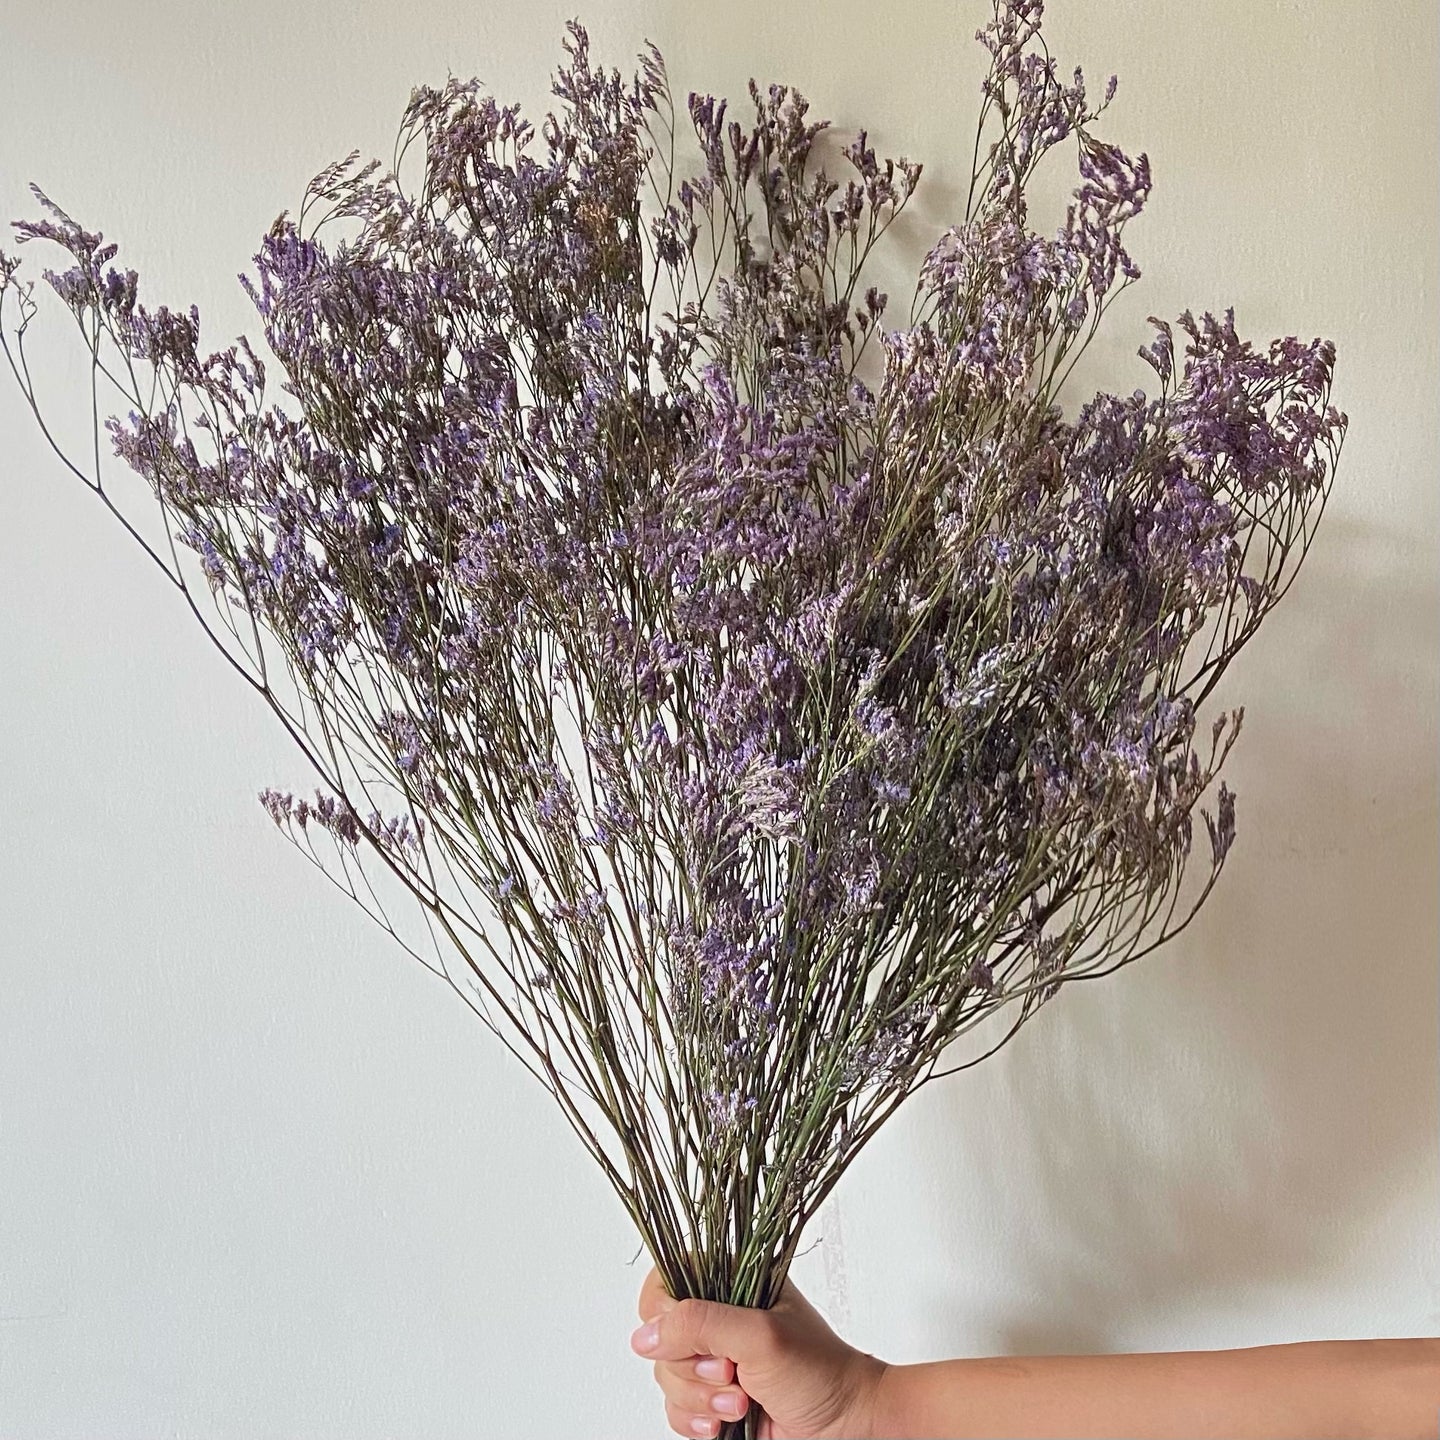 Naturally Dried Lavender stems